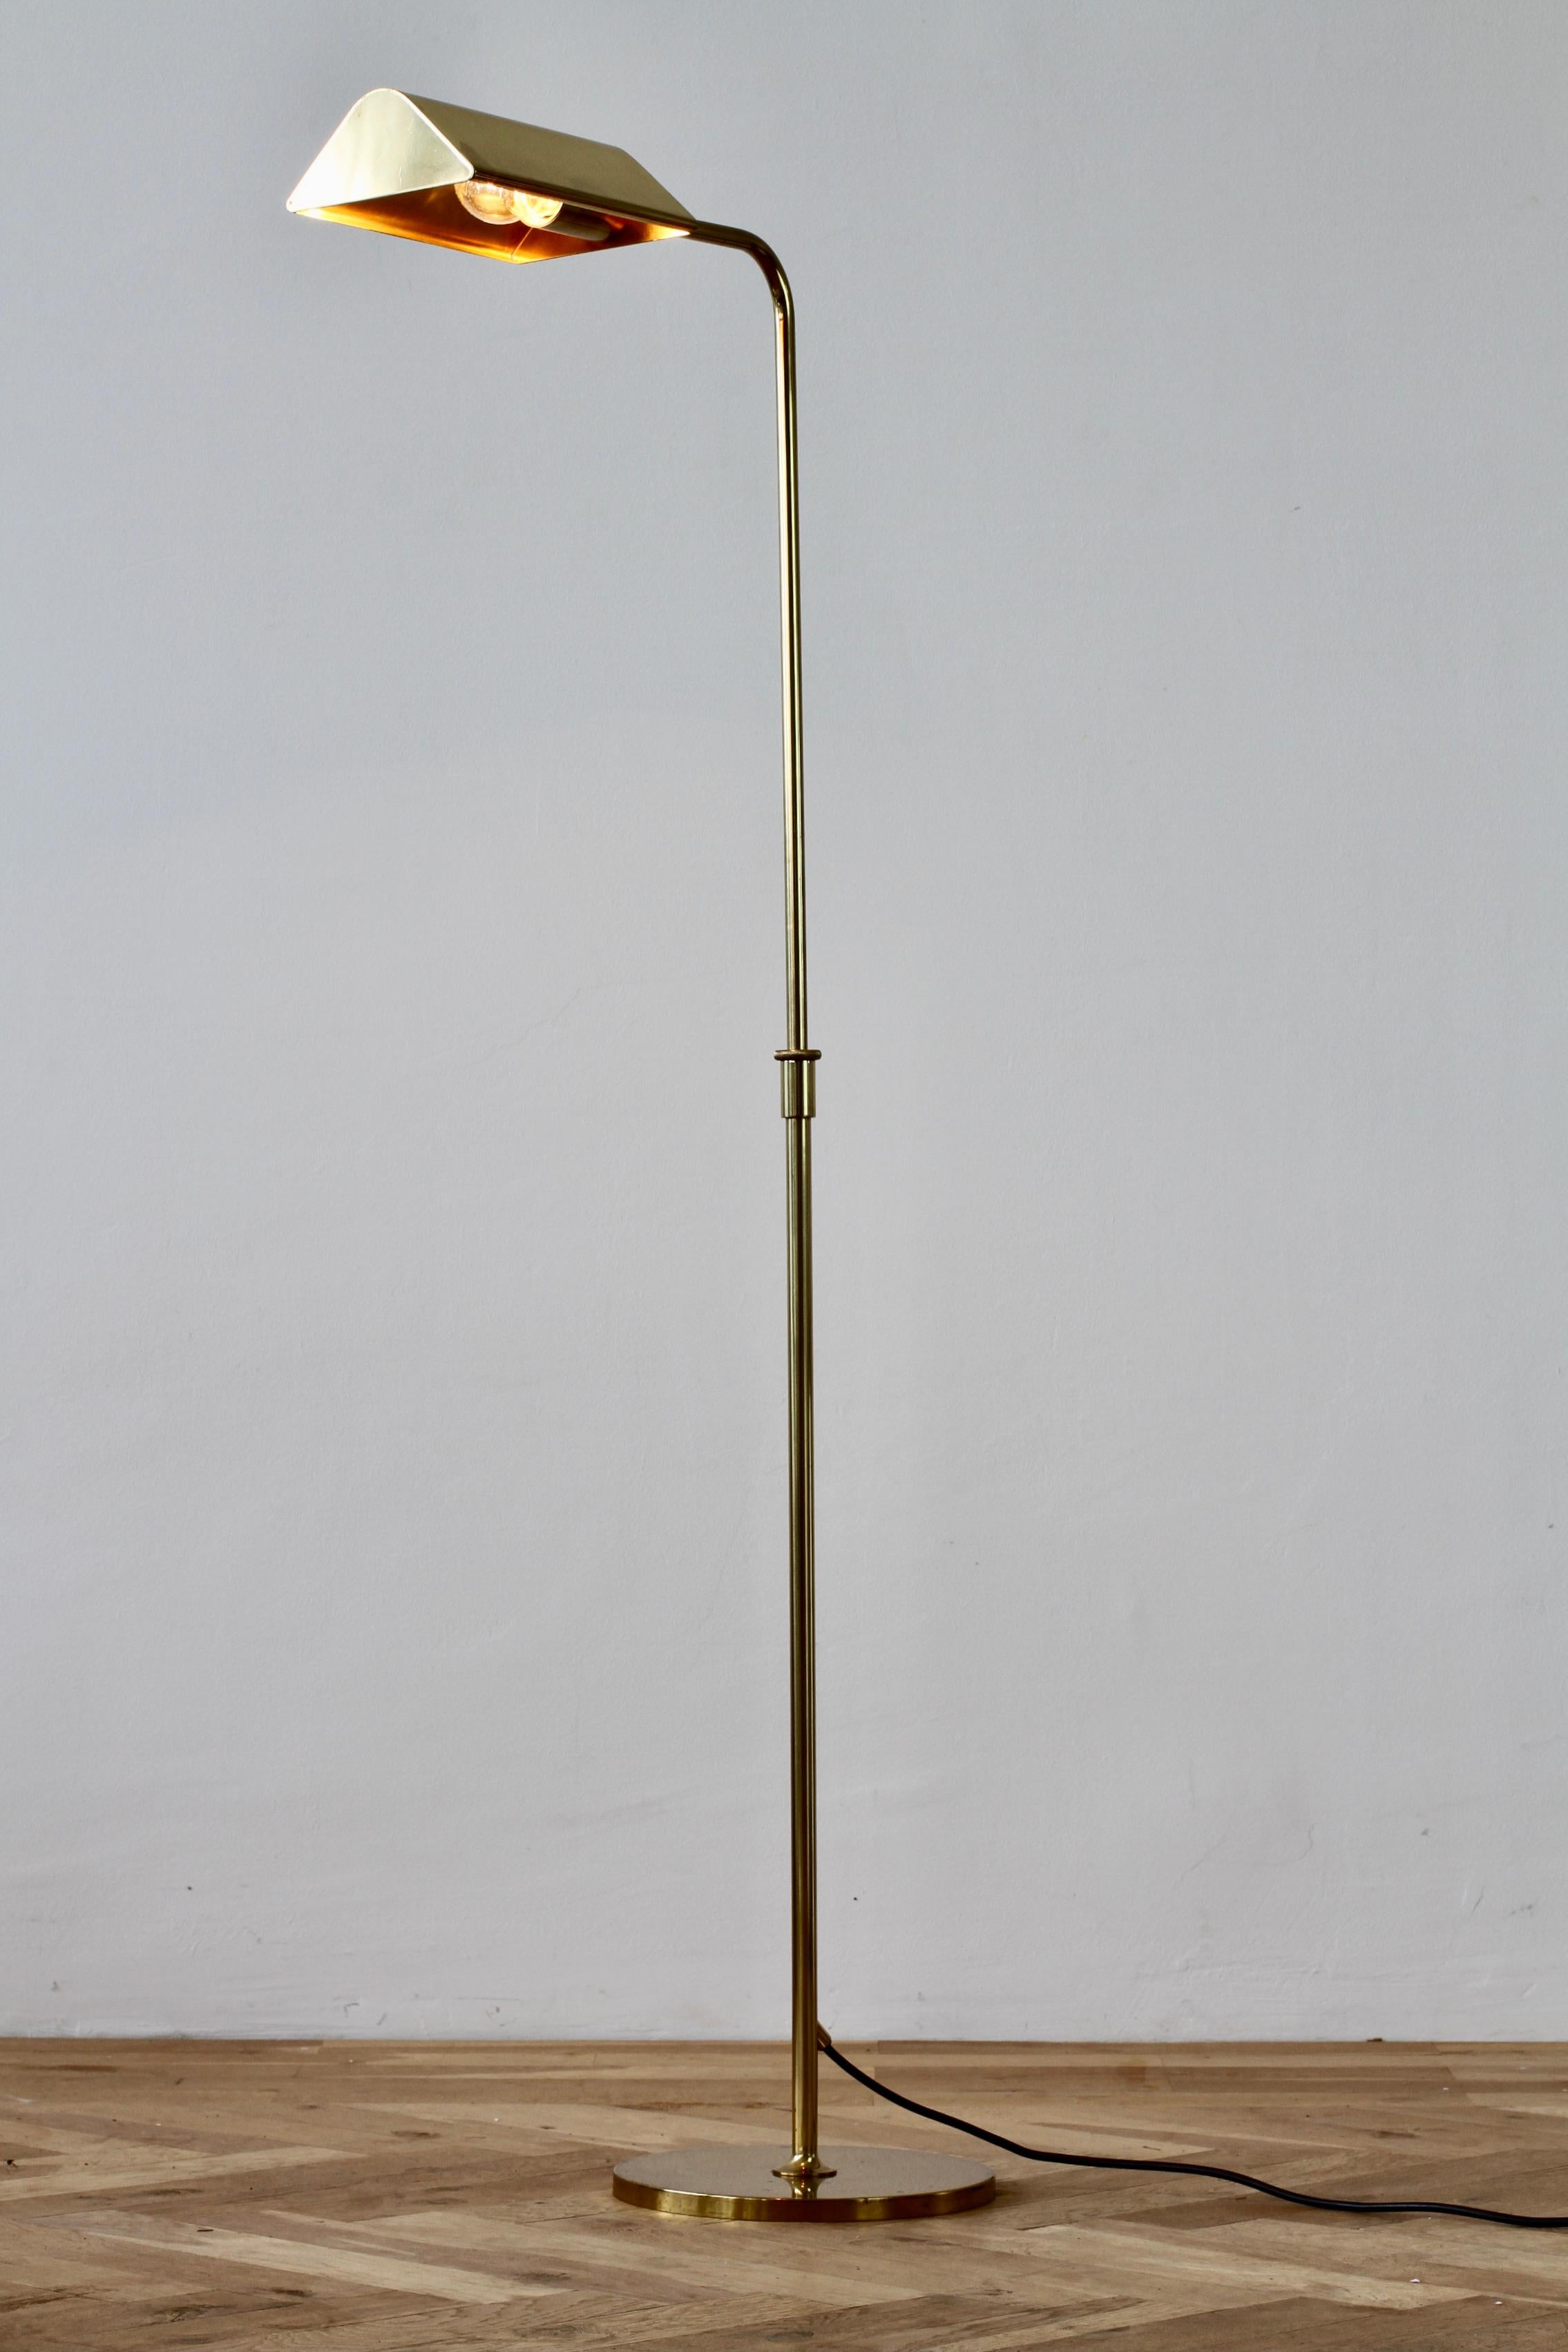 Mid-Century Modern vintage German made adjustable reading light or floor lamp designed by Florian Schulz circa late 1970s - early 1980s. Featuring polished brass (now with age related patina) and height adjustable as is the round brass shade making